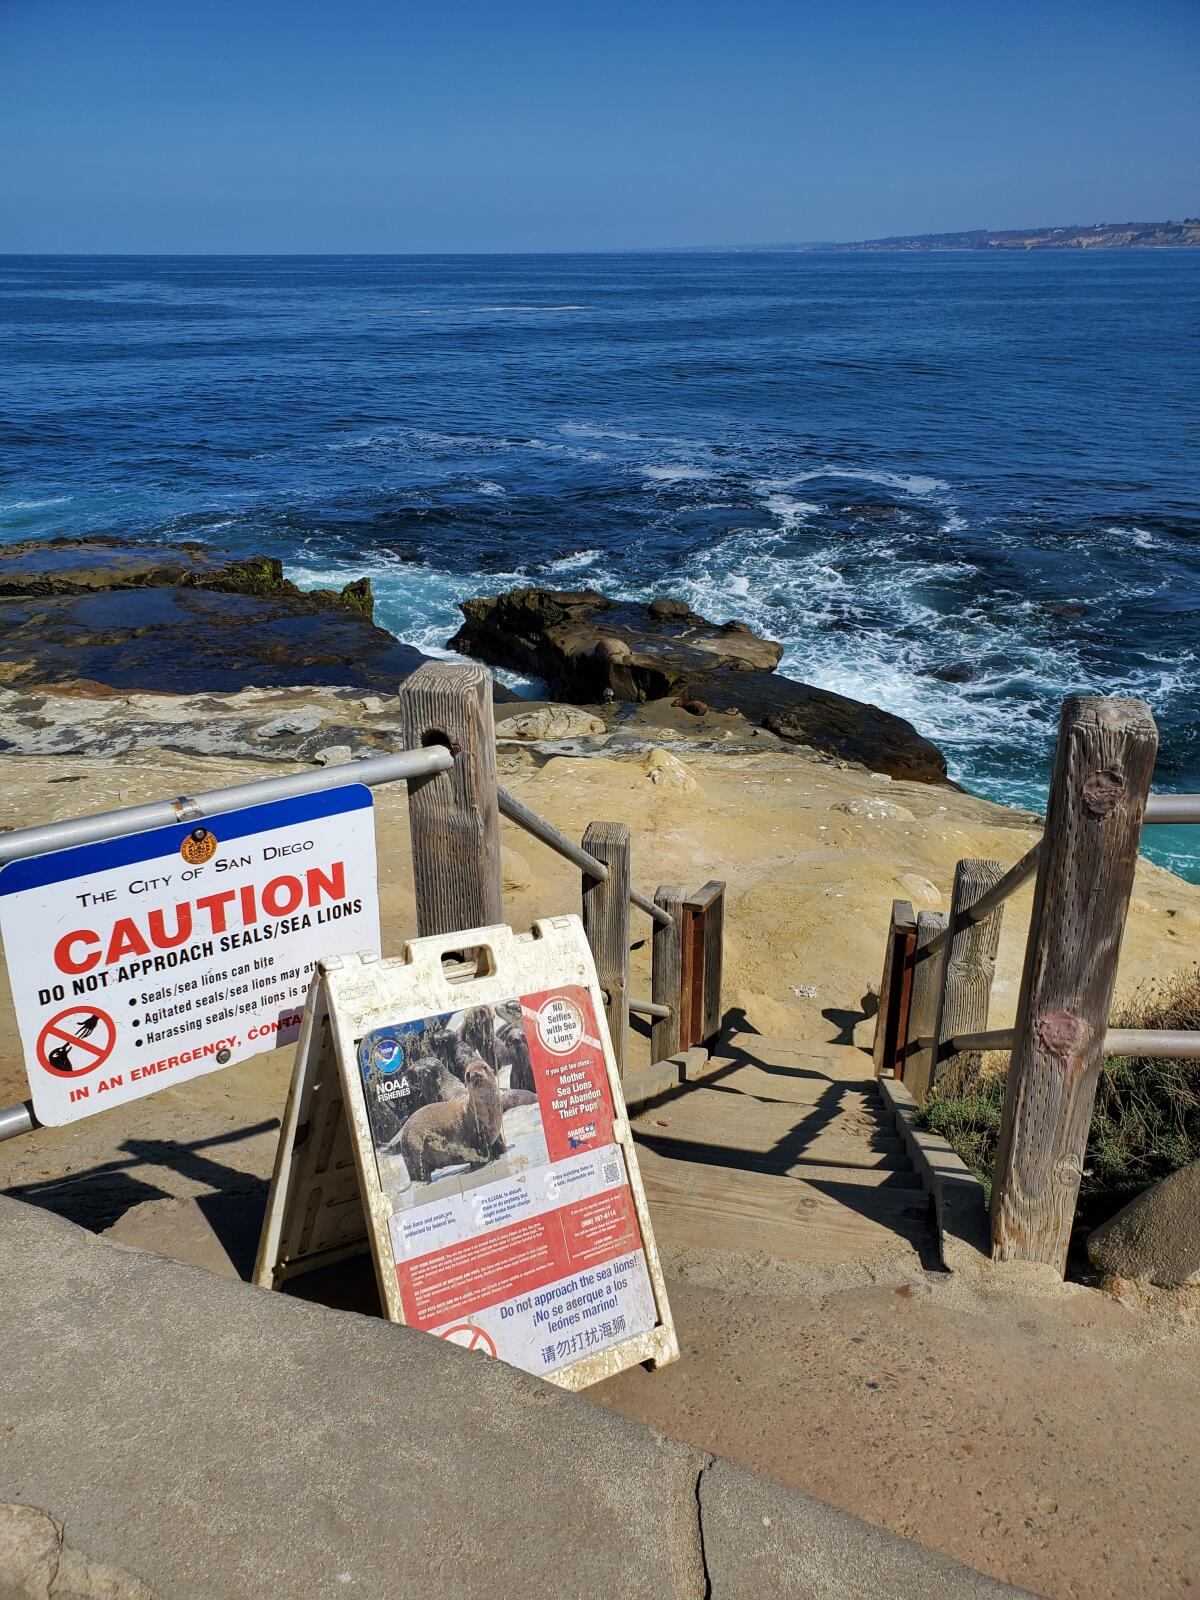 The stairway leading to the bluffs at Point La Jolla was open as of Sept. 16.